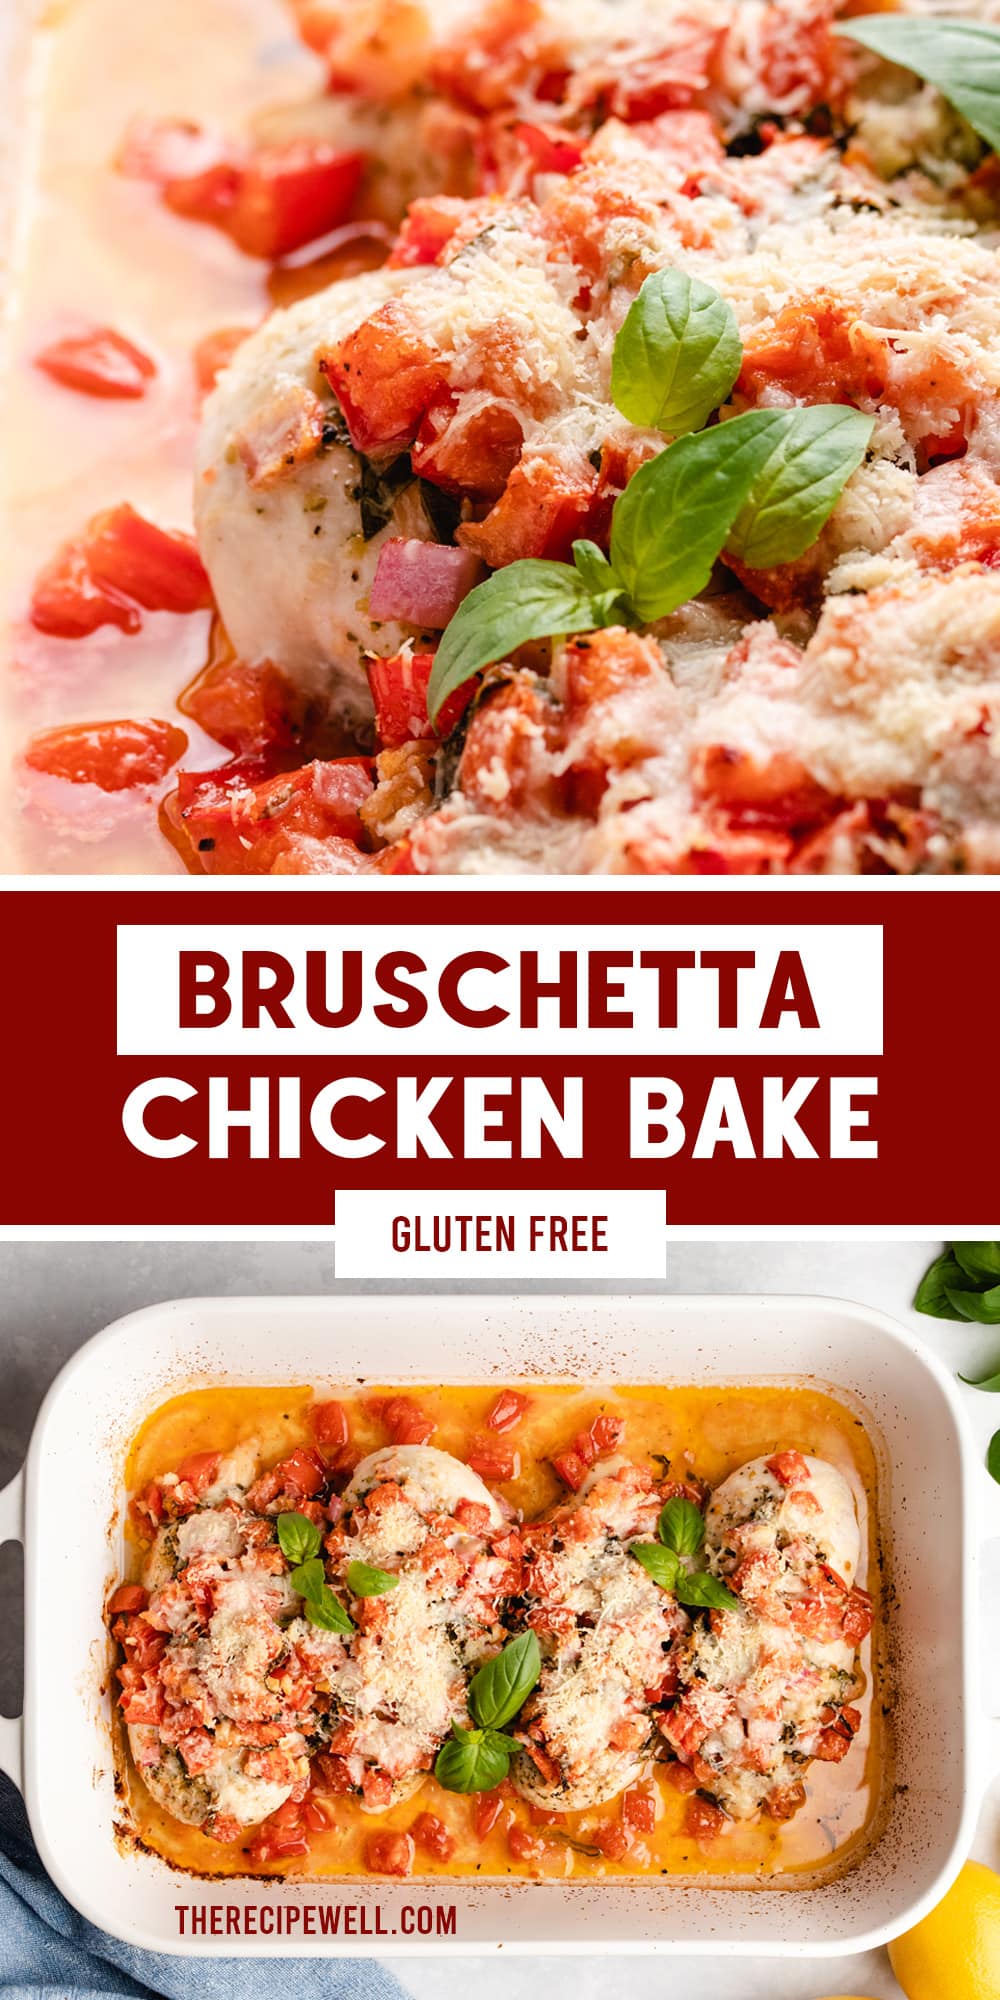 Bruschetta Chicken Bake is an easy summer meal. Made with a flavourful, fresh tomato topping and a generous amount of parmesan cheese, your family will love this chicken dinner. It's great for meal prep too! via @therecipewell